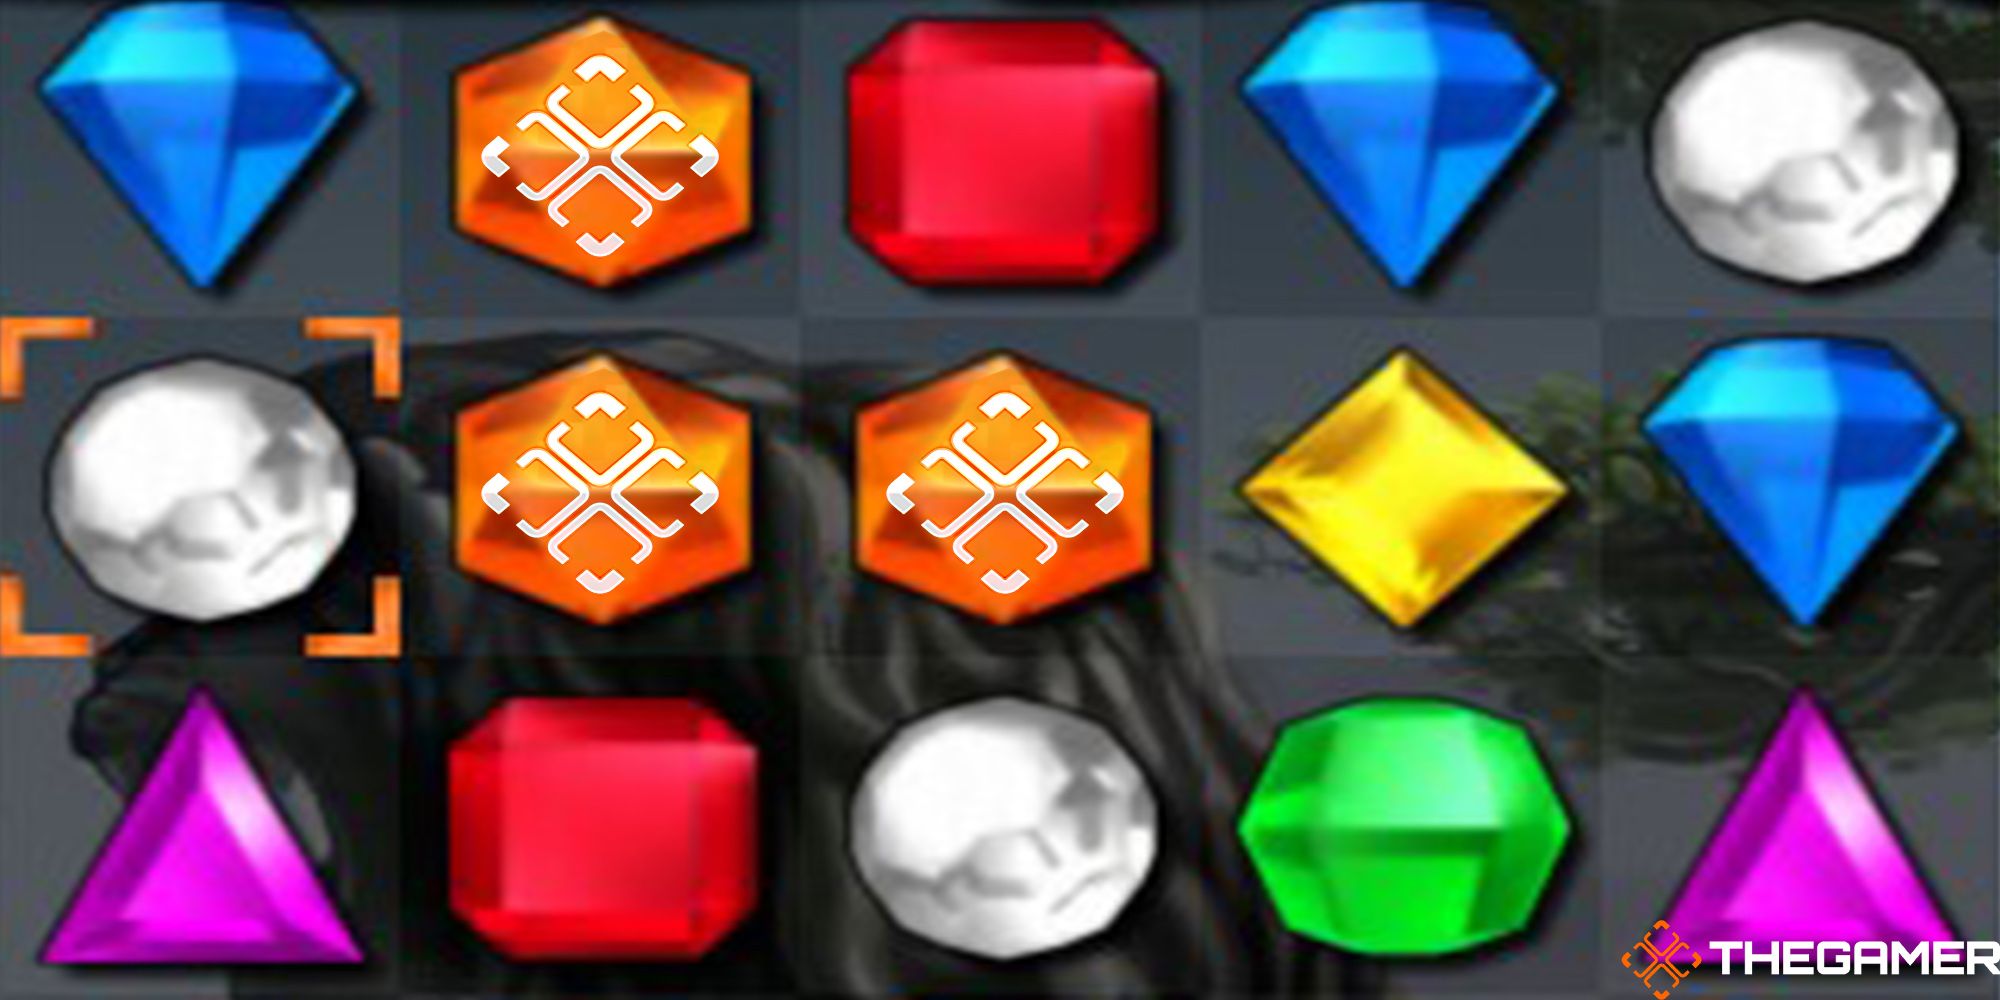 A close-up screen shot of Bejeweled with thegamer's icon embedded on the orange gems. Custom Image for TG.